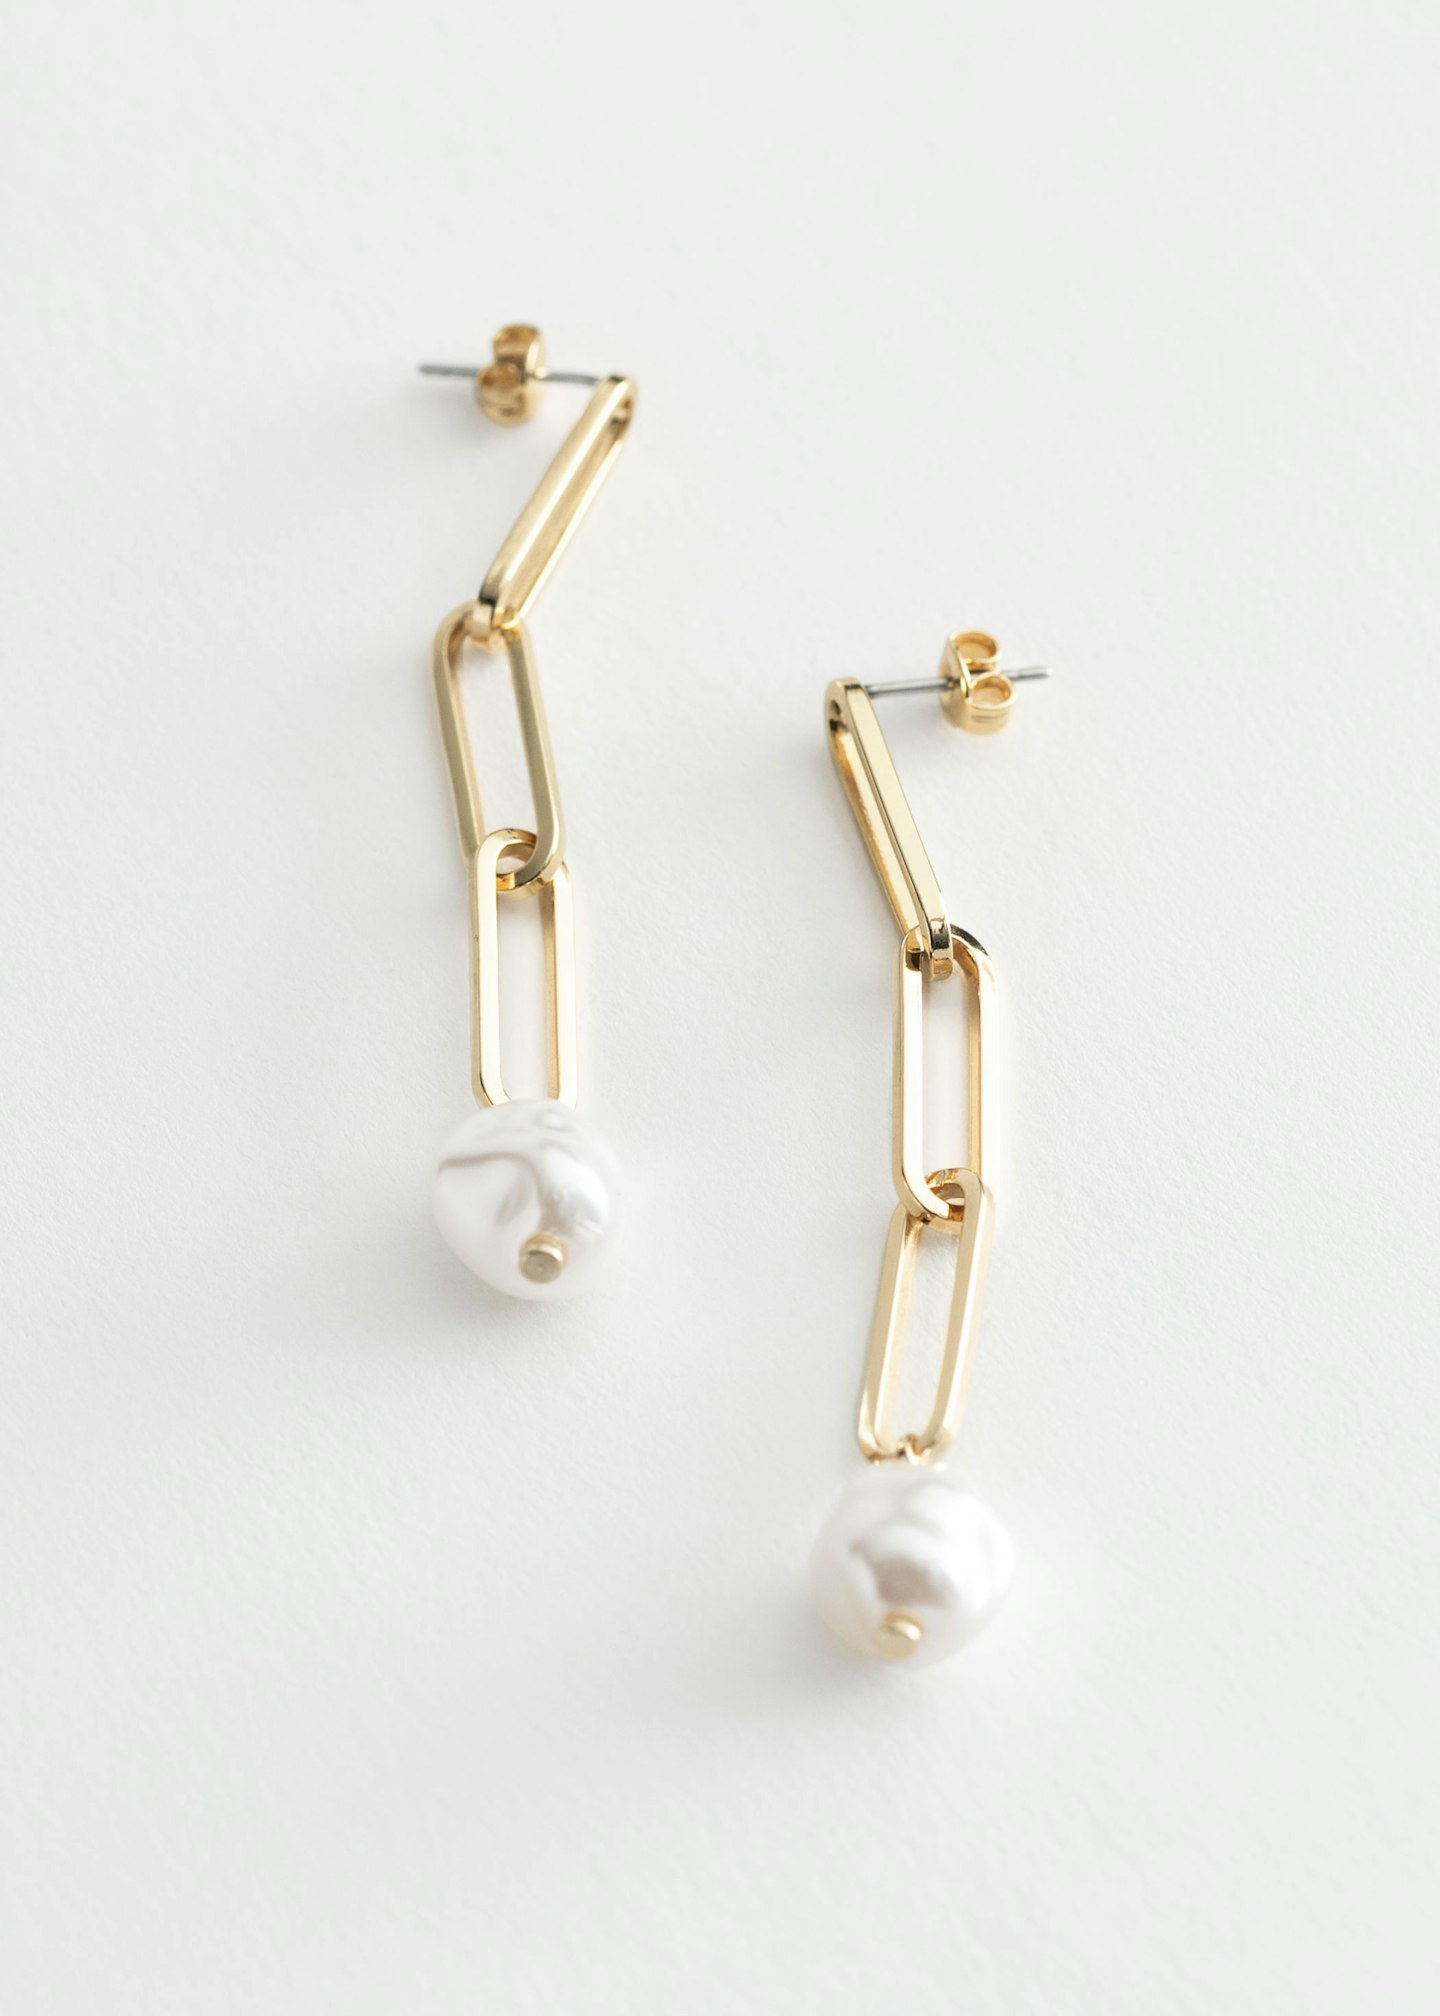 & Other Stories, Dangling Pearl Pendant Earrings, £17